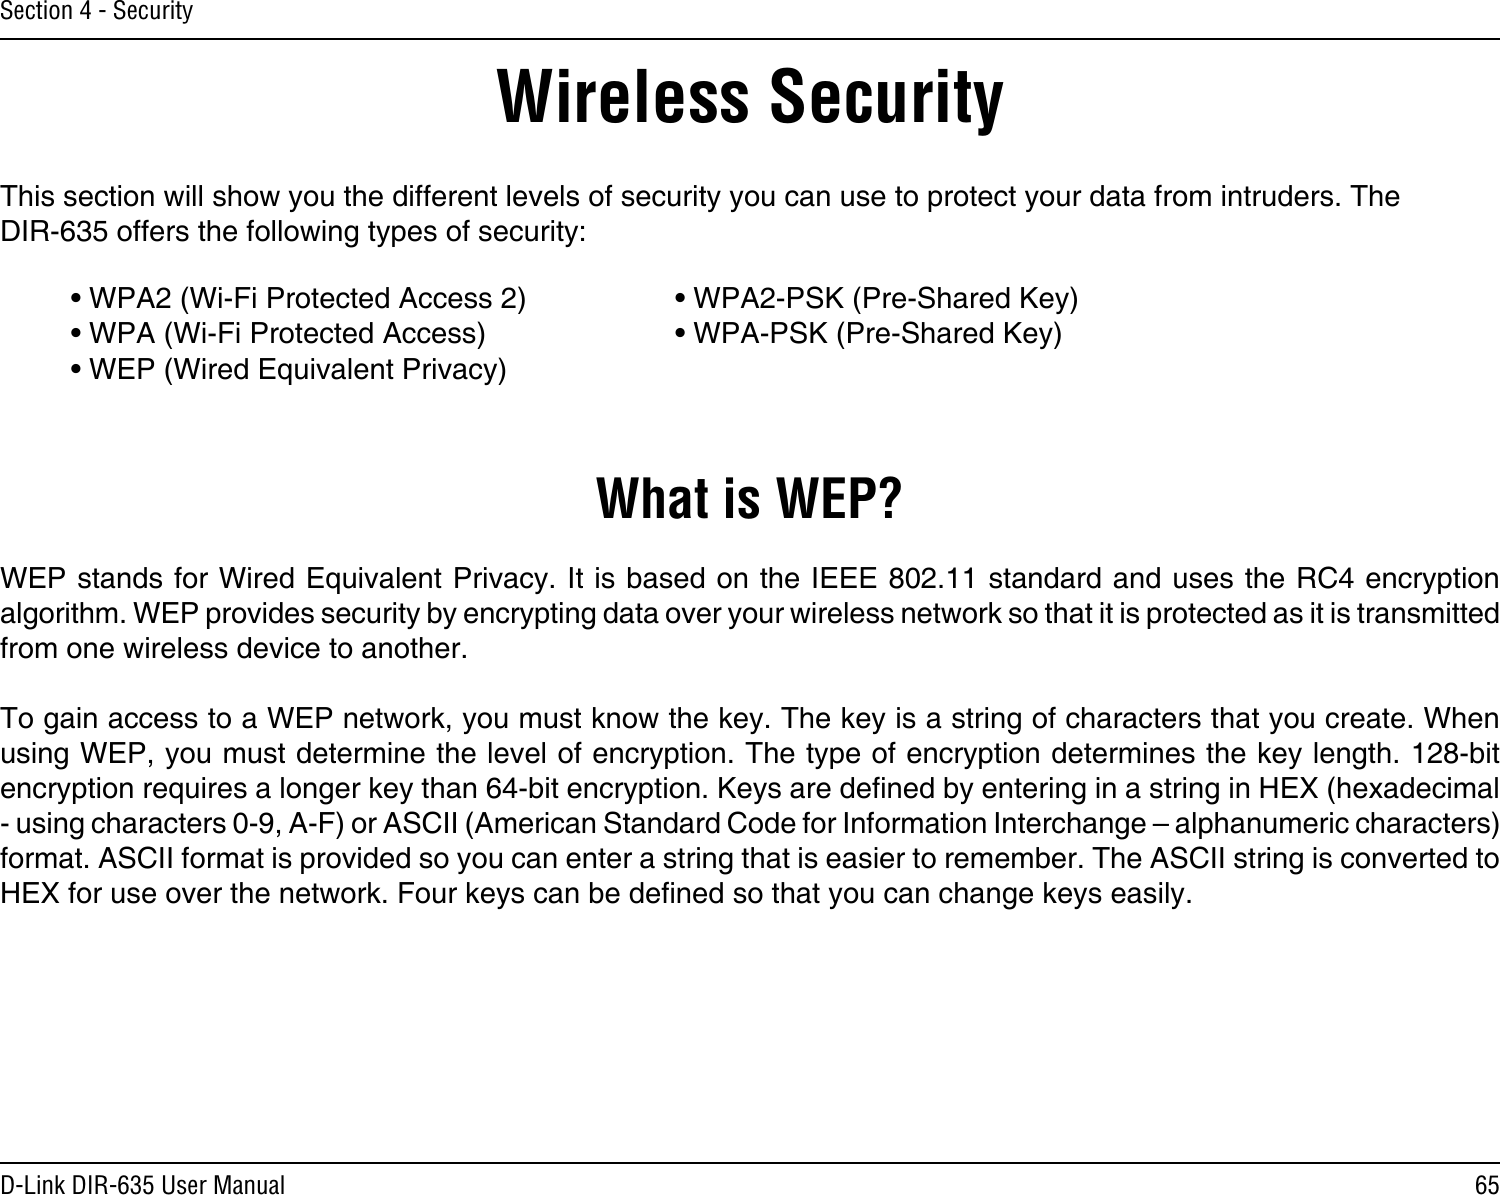 65D-Link DIR-635 User ManualSection 4 - SecurityWireless SecurityThis section will show you the different levels of security you can use to protect your data from intruders. The DIR-635 offers the following types of security:• WPA2 (Wi-Fi Protected Access 2)     • WPA2-PSK (Pre-Shared Key)• WPA (Wi-Fi Protected Access)      • WPA-PSK (Pre-Shared Key)• WEP (Wired Equivalent Privacy)What is WEP?WEP stands for Wired Equivalent Privacy. It is based on the IEEE 802.11 standard and uses the RC4 encryption algorithm. WEP provides security by encrypting data over your wireless network so that it is protected as it is transmitted from one wireless device to another.To gain access to a WEP network, you must know the key. The key is a string of characters that you create. When using WEP, you must determine the level of encryption. The type of encryption determines the key length. 128-bit encryption requires a longer key than 64-bit encryption. Keys are dened by entering in a string in HEX (hexadecimal - using characters 0-9, A-F) or ASCII (American Standard Code for Information Interchange – alphanumeric characters) format. ASCII format is provided so you can enter a string that is easier to remember. The ASCII string is converted to HEX for use over the network. Four keys can be dened so that you can change keys easily.